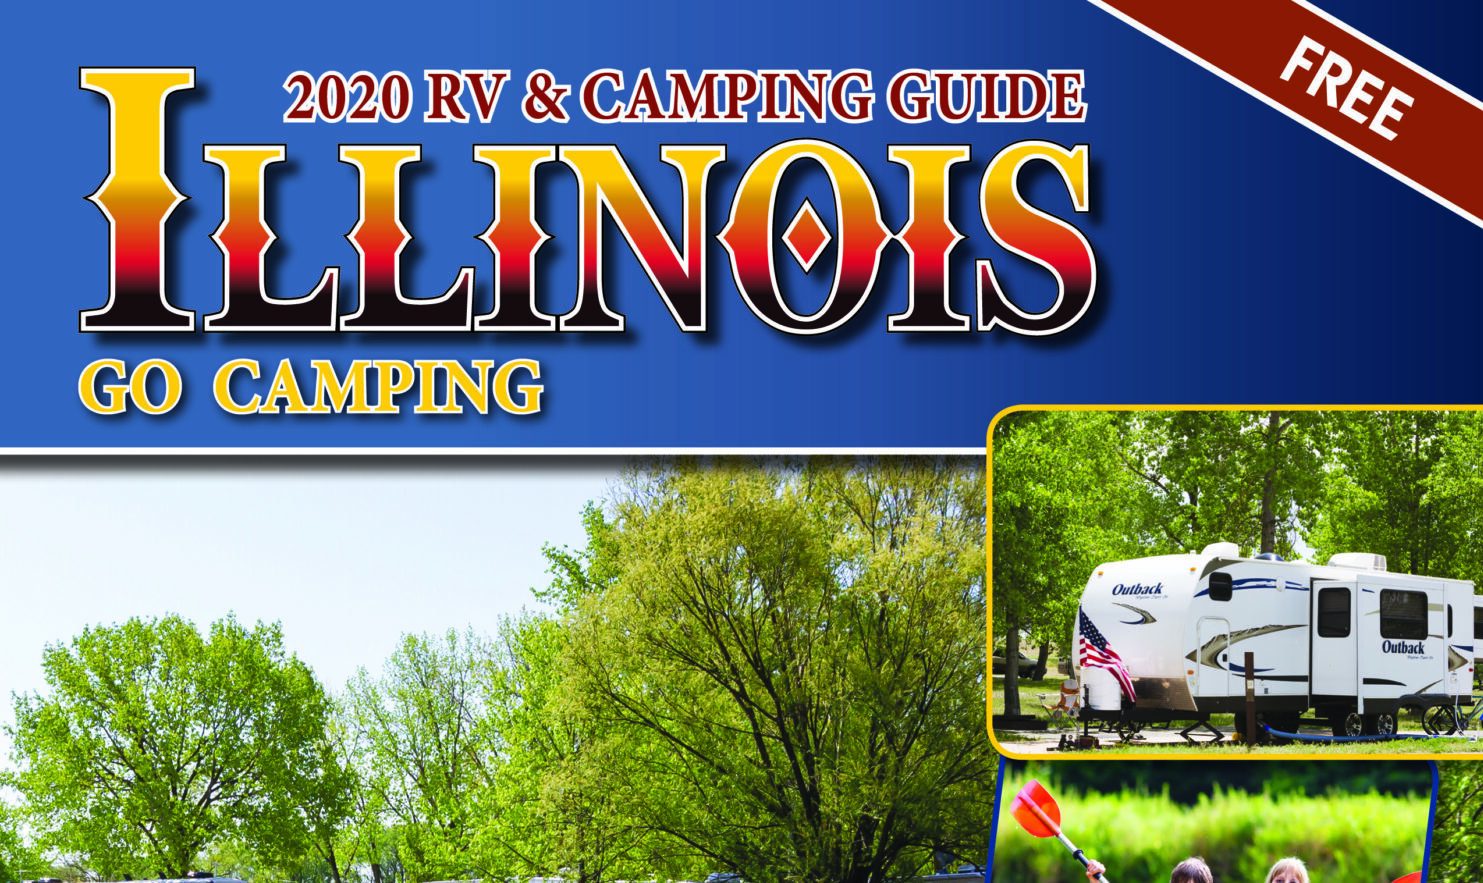 Illinois Campgrounds Release 2020 Camping Guide